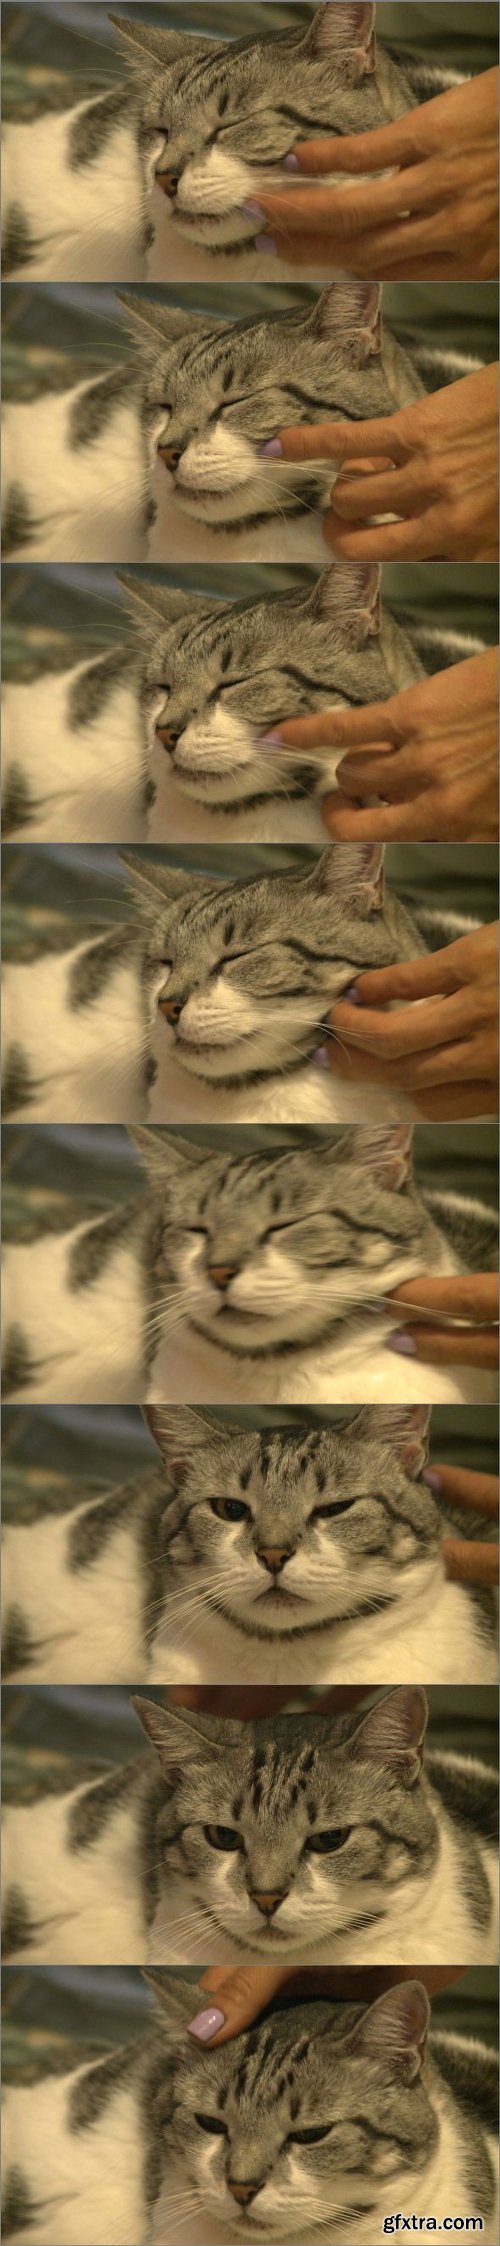 Cat Being Scratched